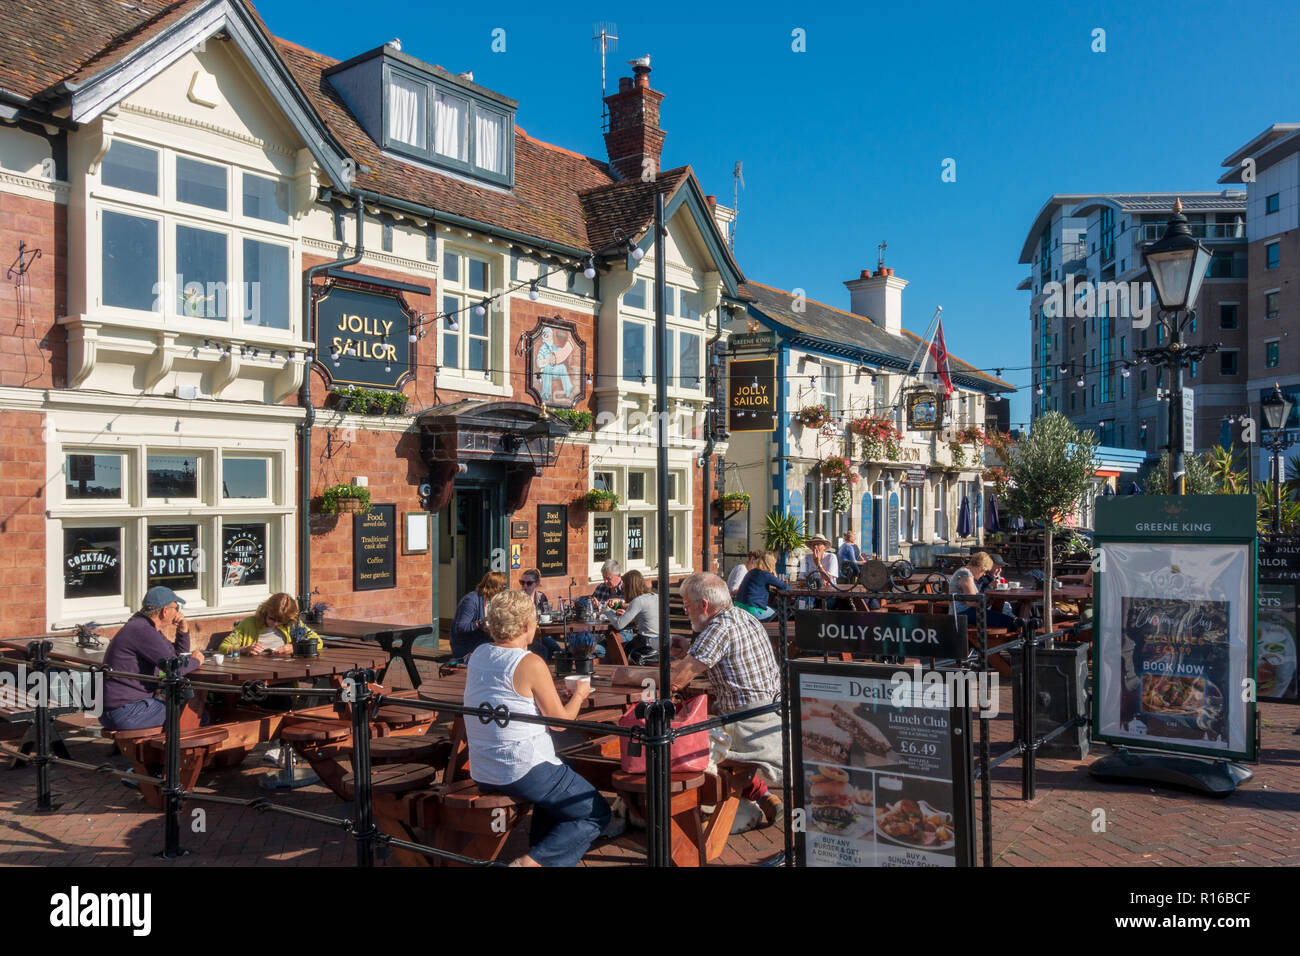 People sitting outside seafront pubs The Jolly Sailor and The Lord Nelson in Poole, Dorset, England Stock Photo